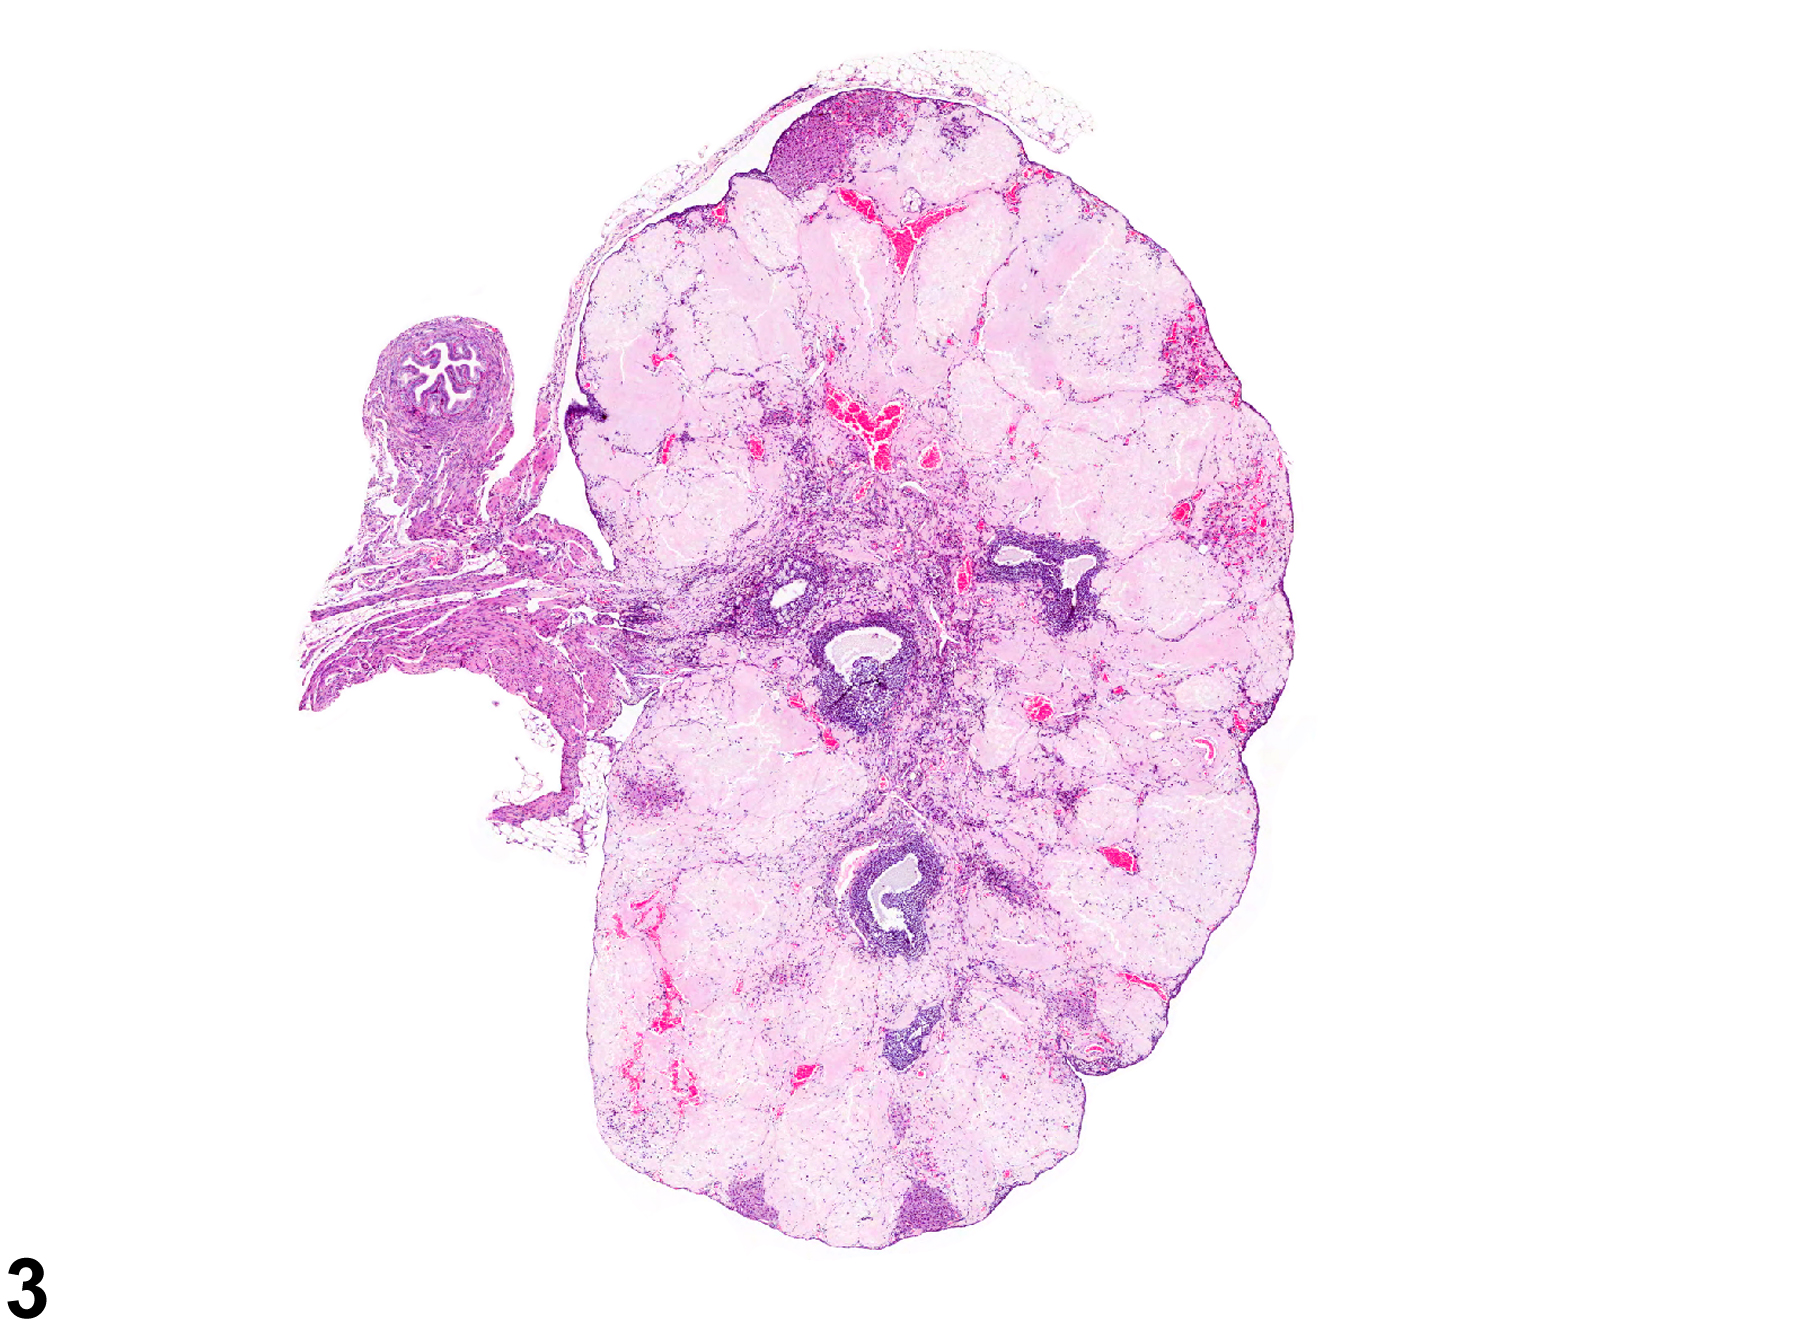 Image of amyloid in the ovary from a female Swiss CD-1 mouse in a chronic study